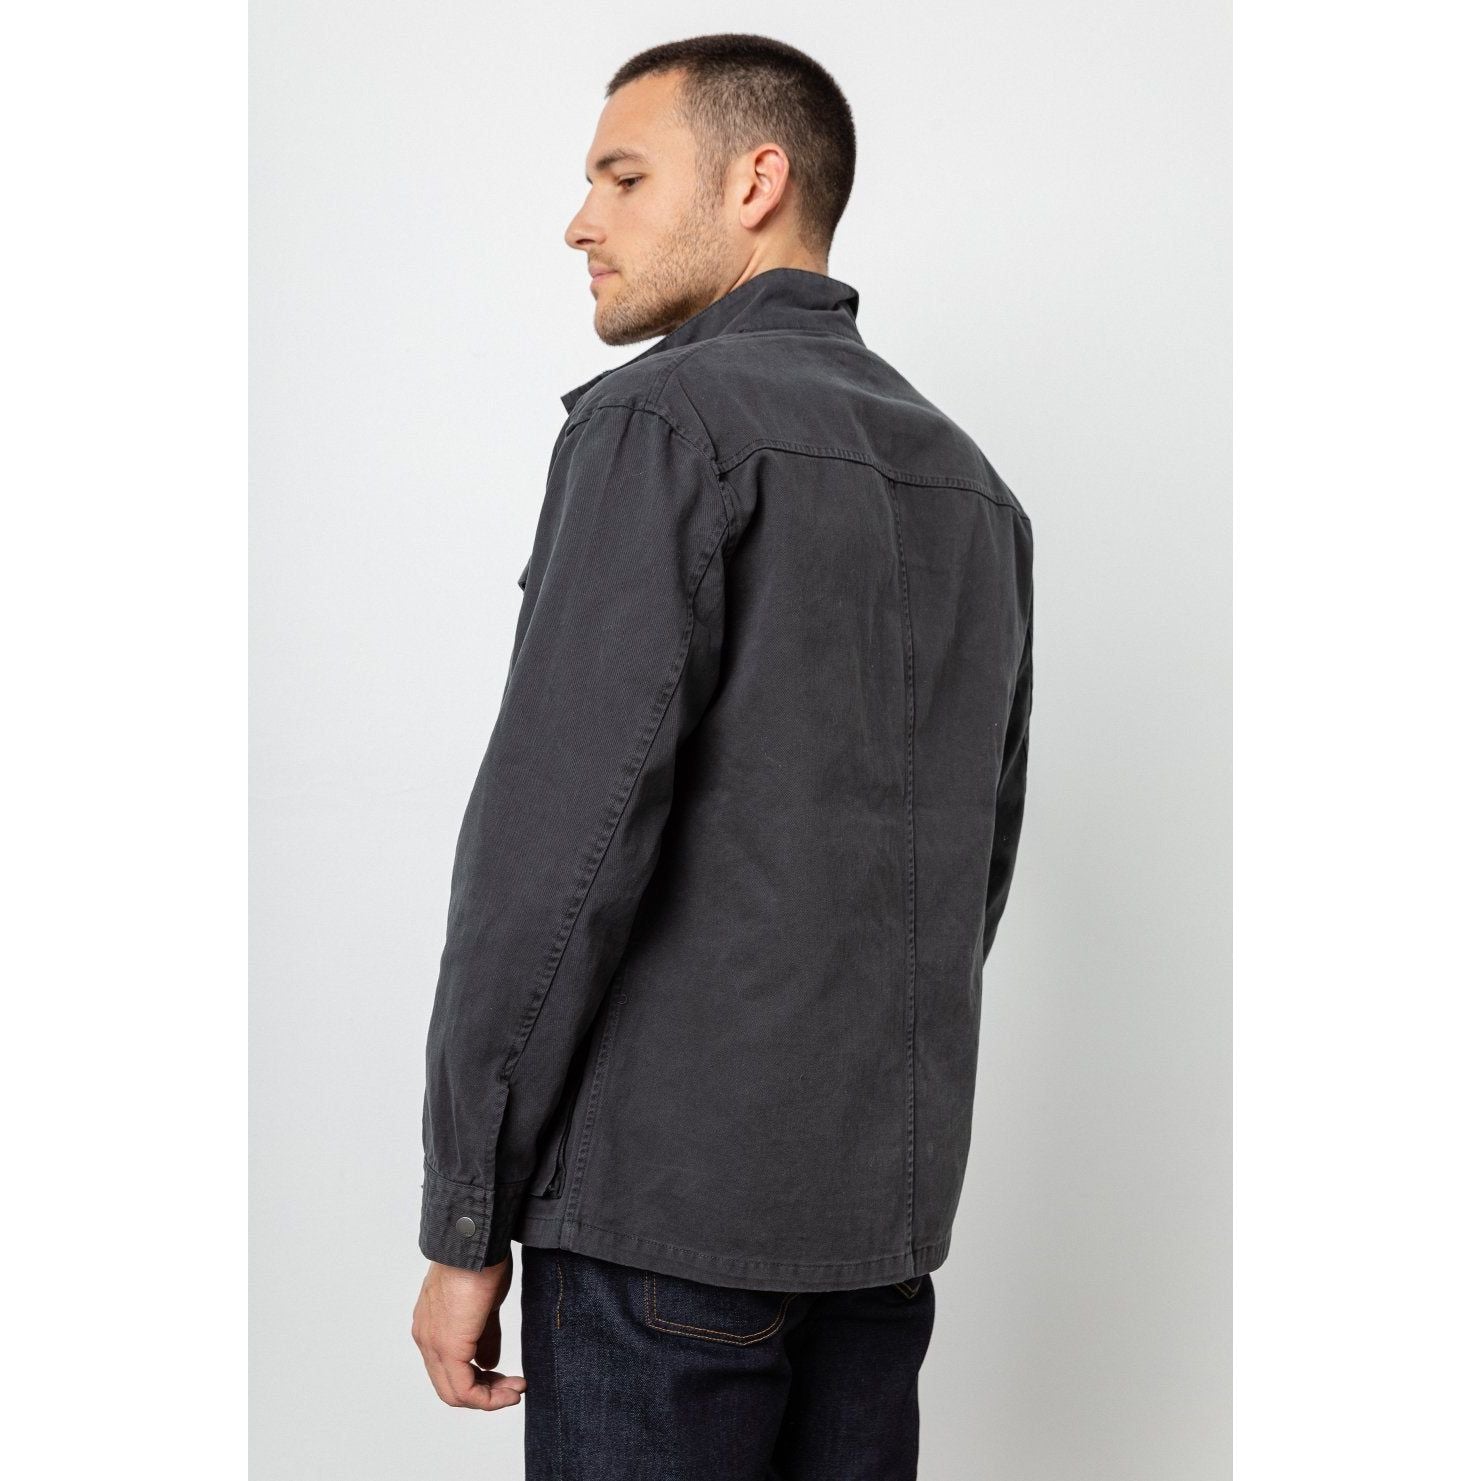 Rails - Porter Jacket in Charcoal-SQ2680108